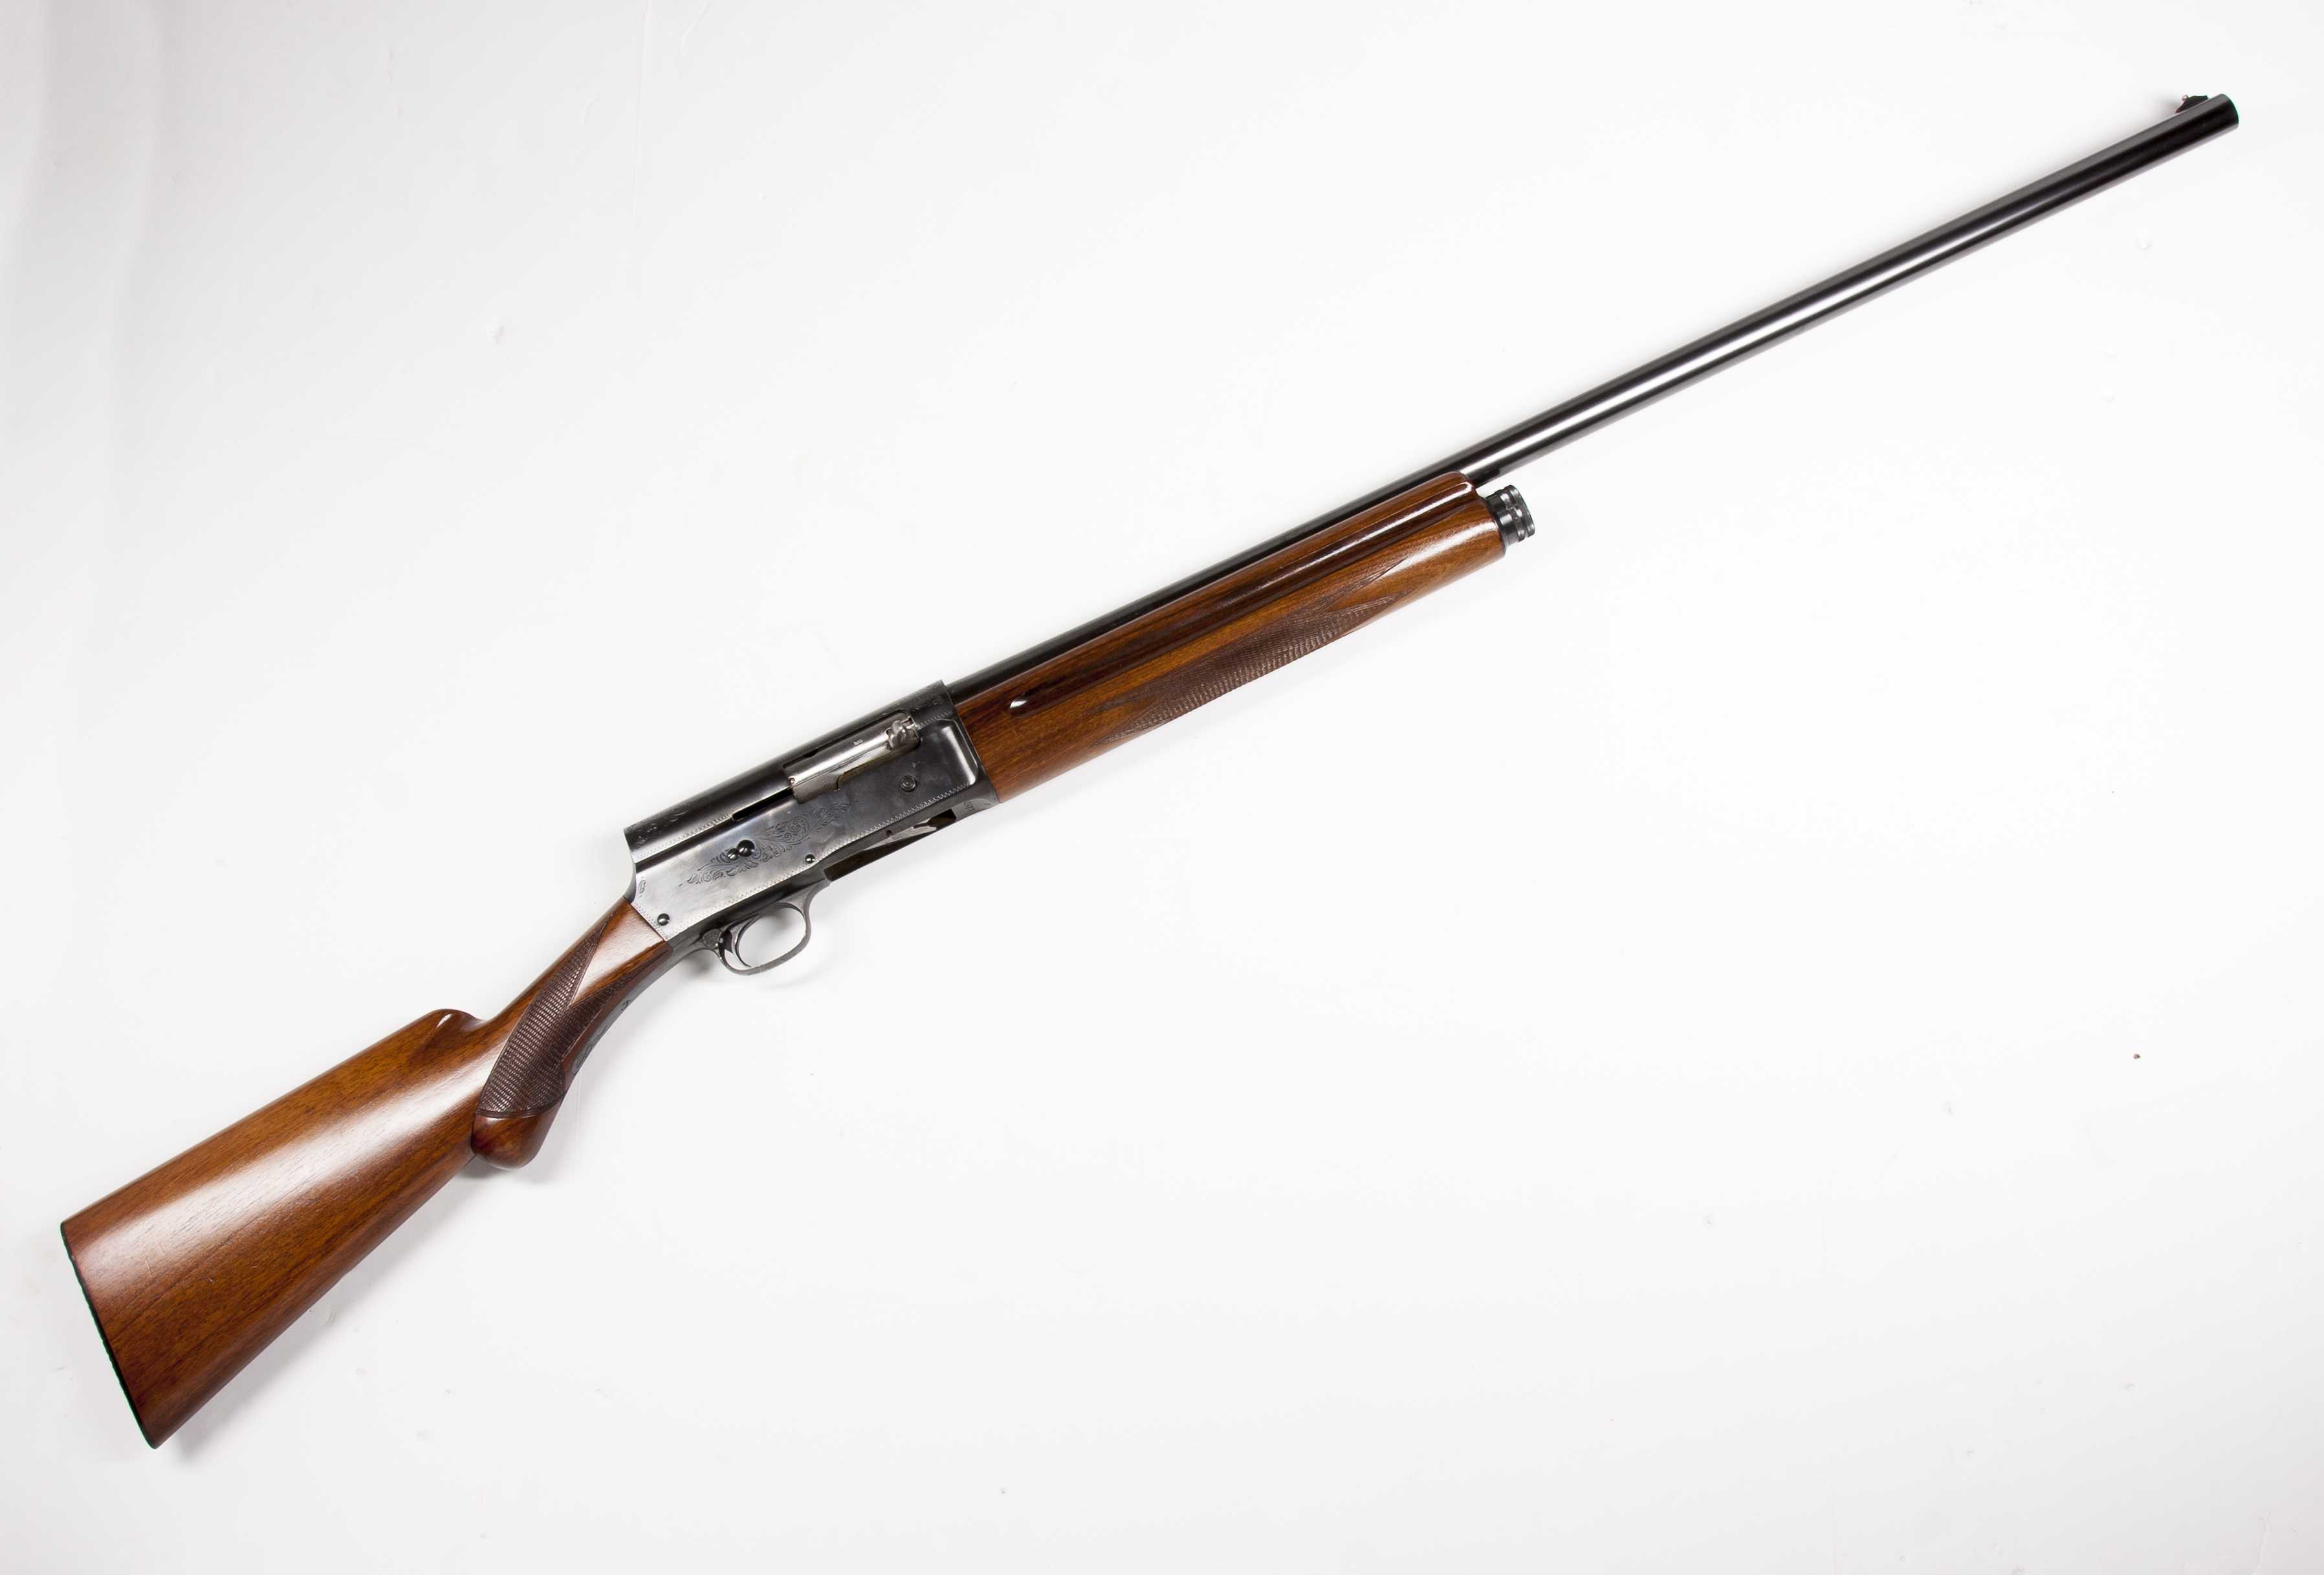 6. Browning has almost certainly got the crown when it comes to successful gun designs, most of which we cannot purchase over here. The Browning Auto 5 was the first mass produced semi automatic shotgun and they sold a lot of those! 